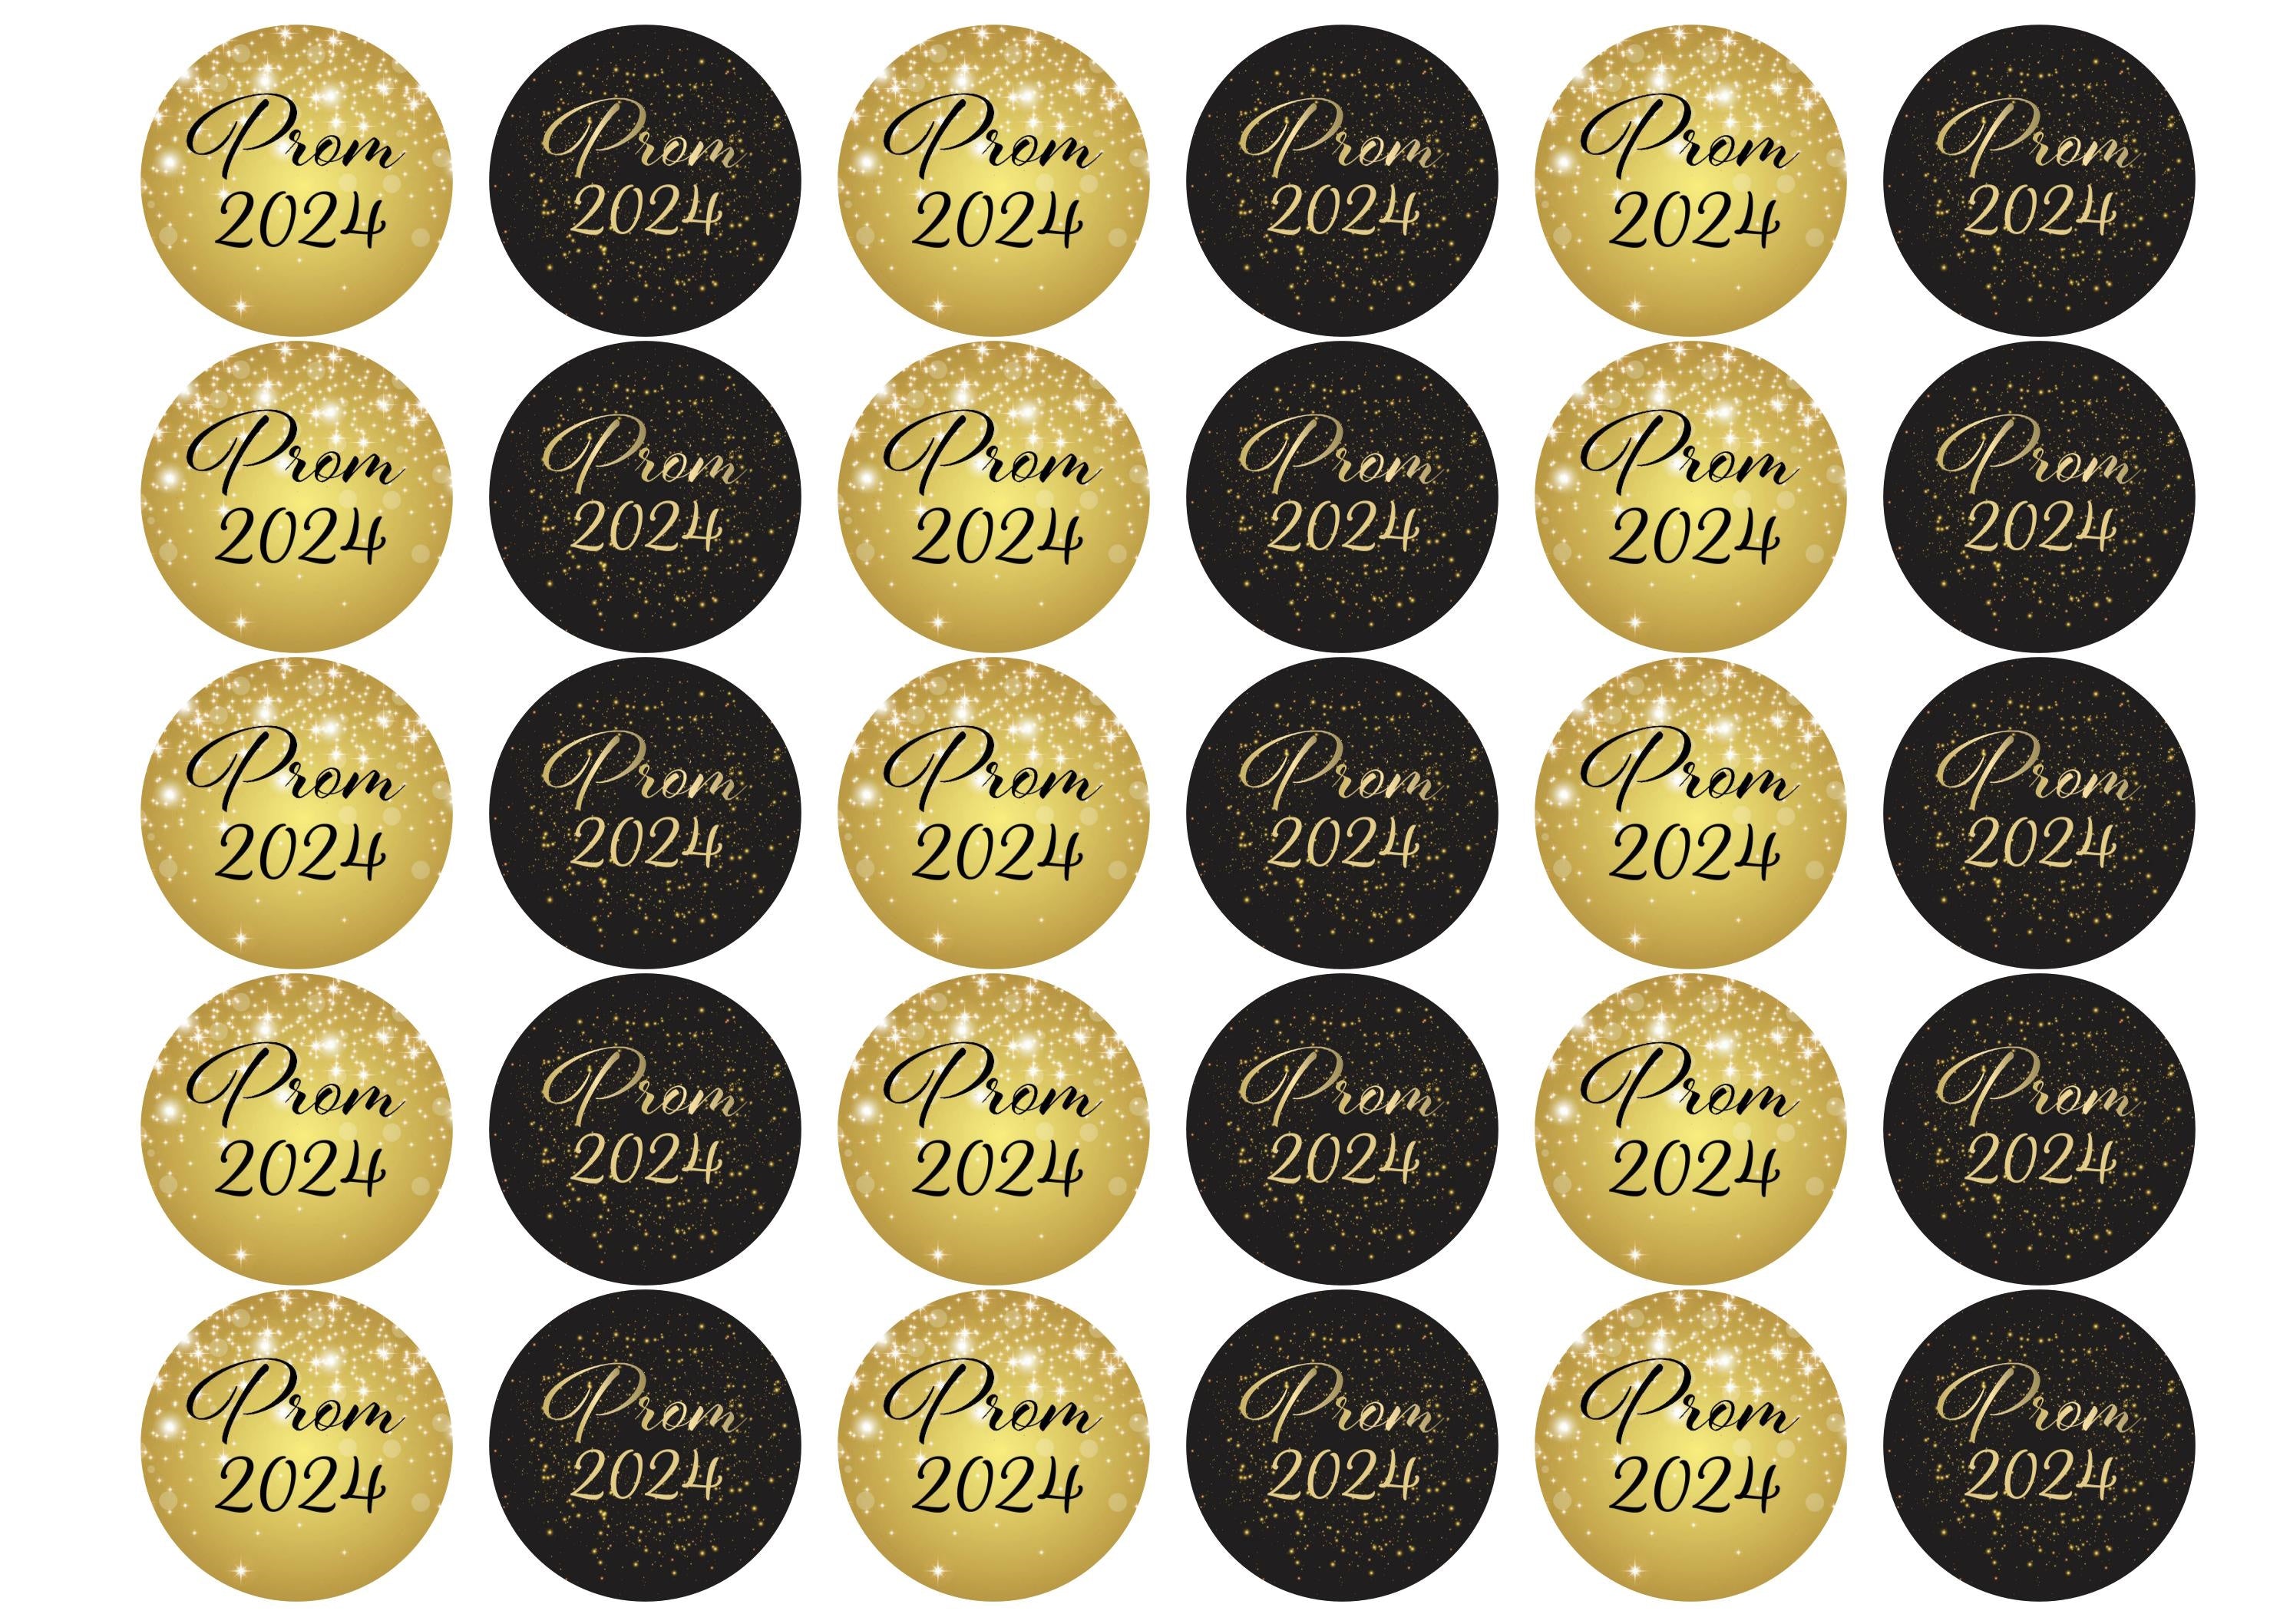 Prom 2024 gold and black cupcake toppers